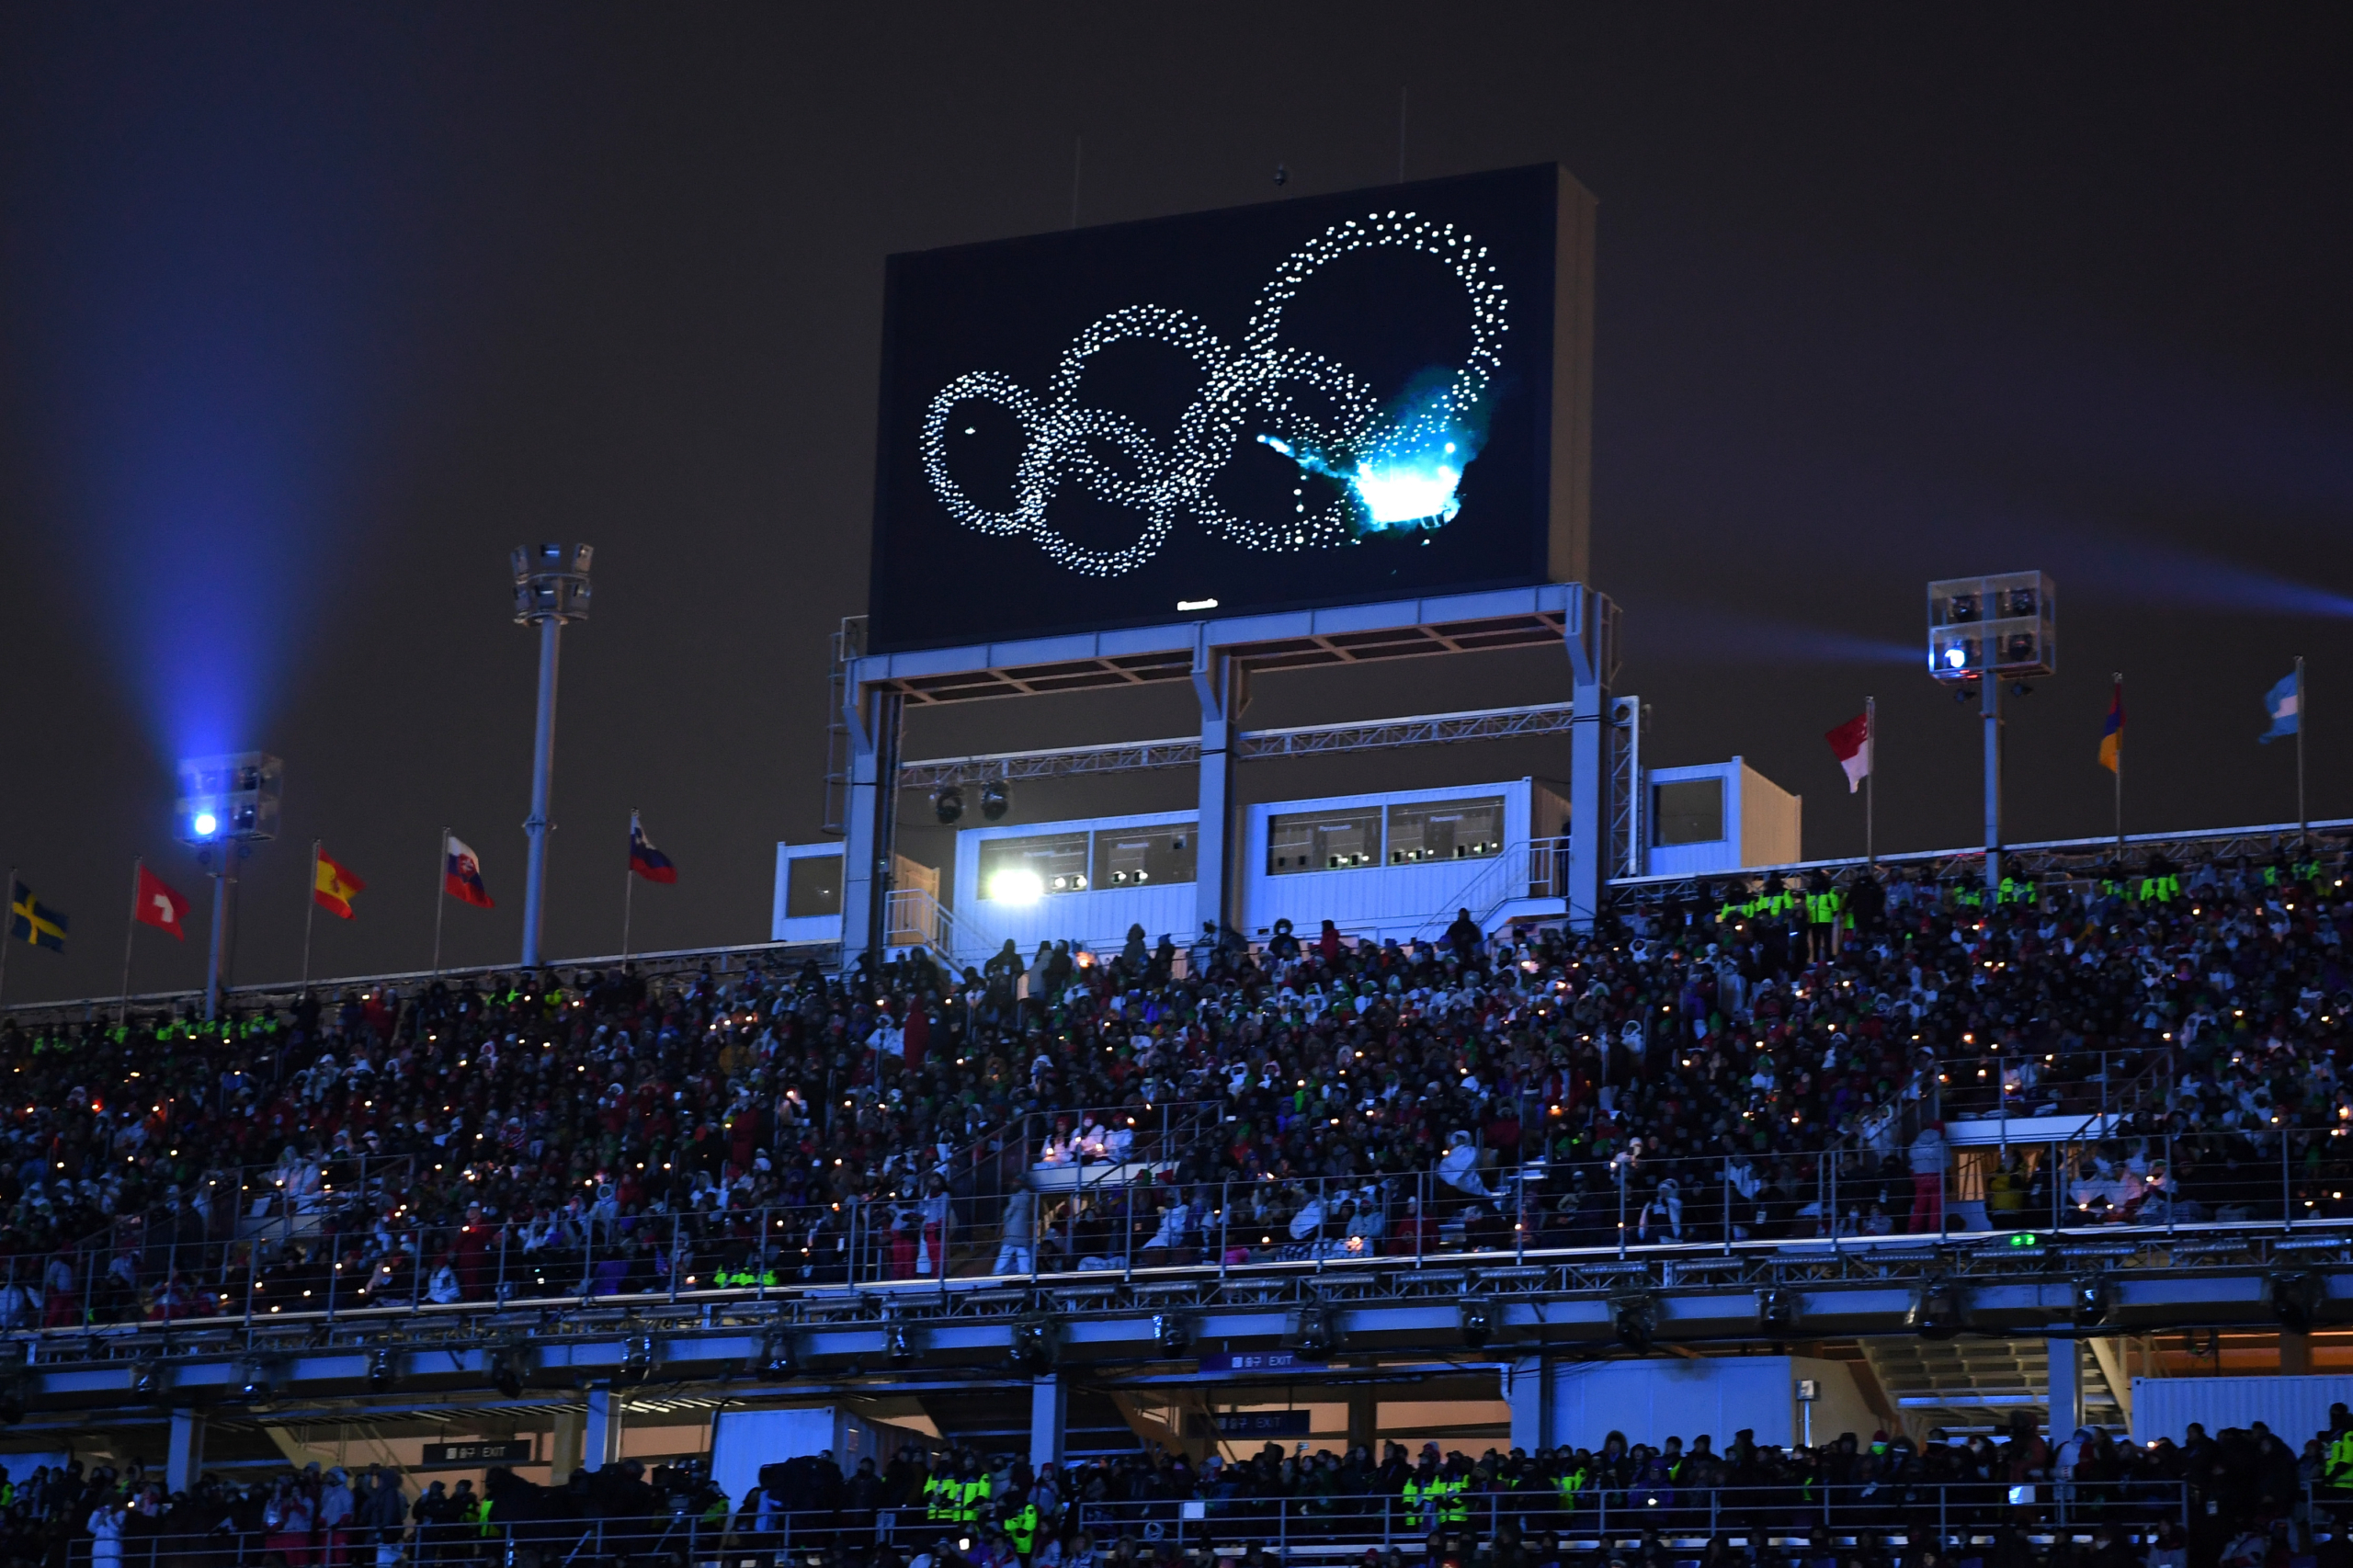 Winter Olympics 2018: Inside the Opening Ceremonies Drone Show